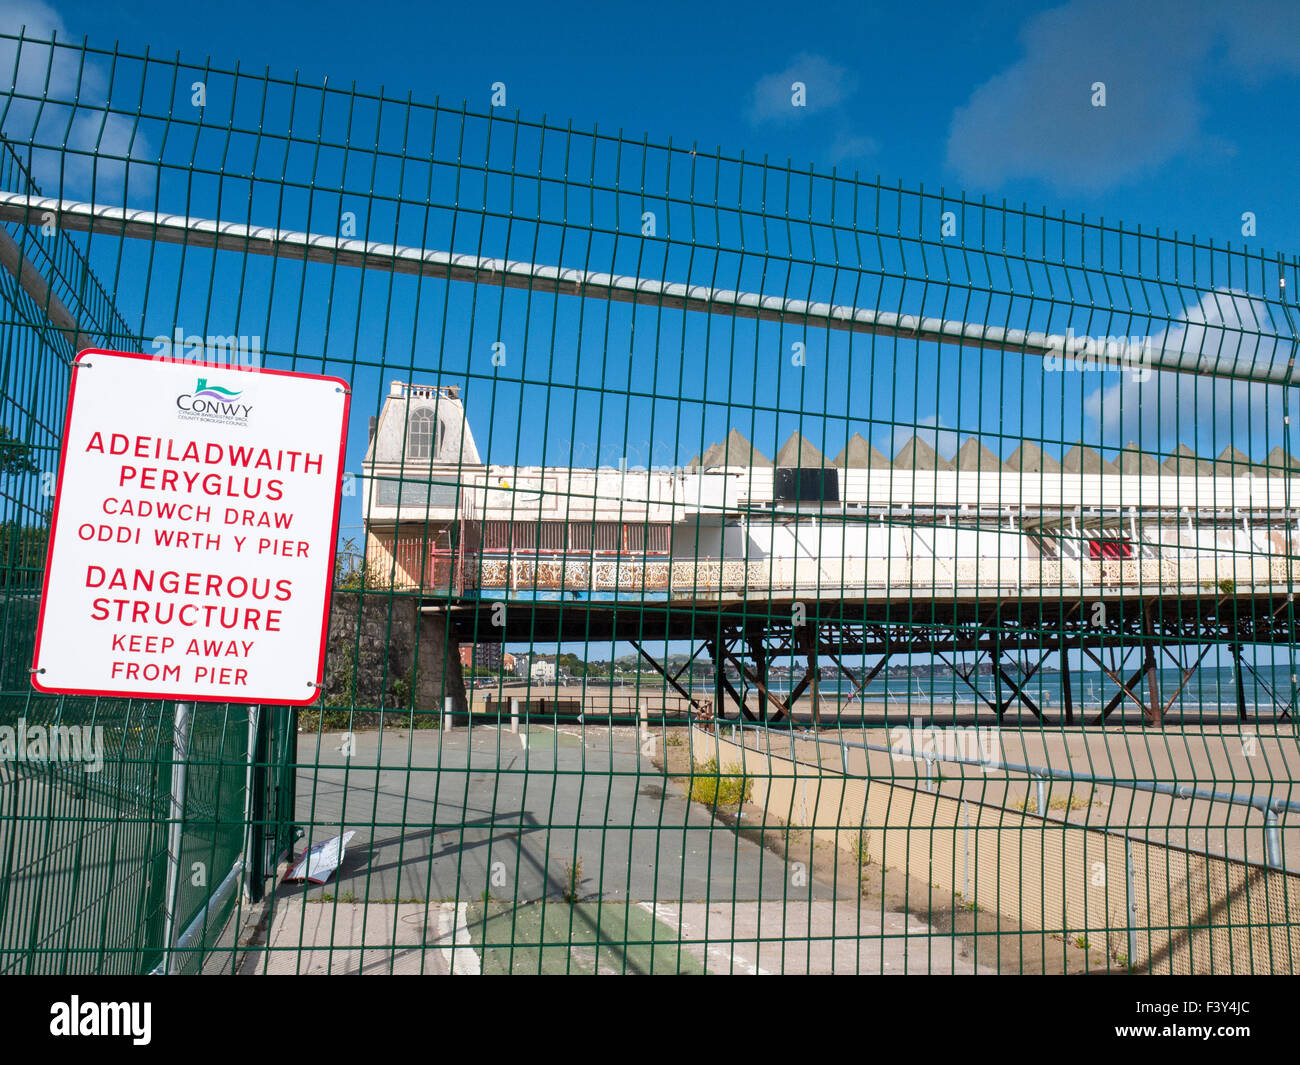 Warning sign for The Victorian Pier in Colwyn Bay Stock Photo